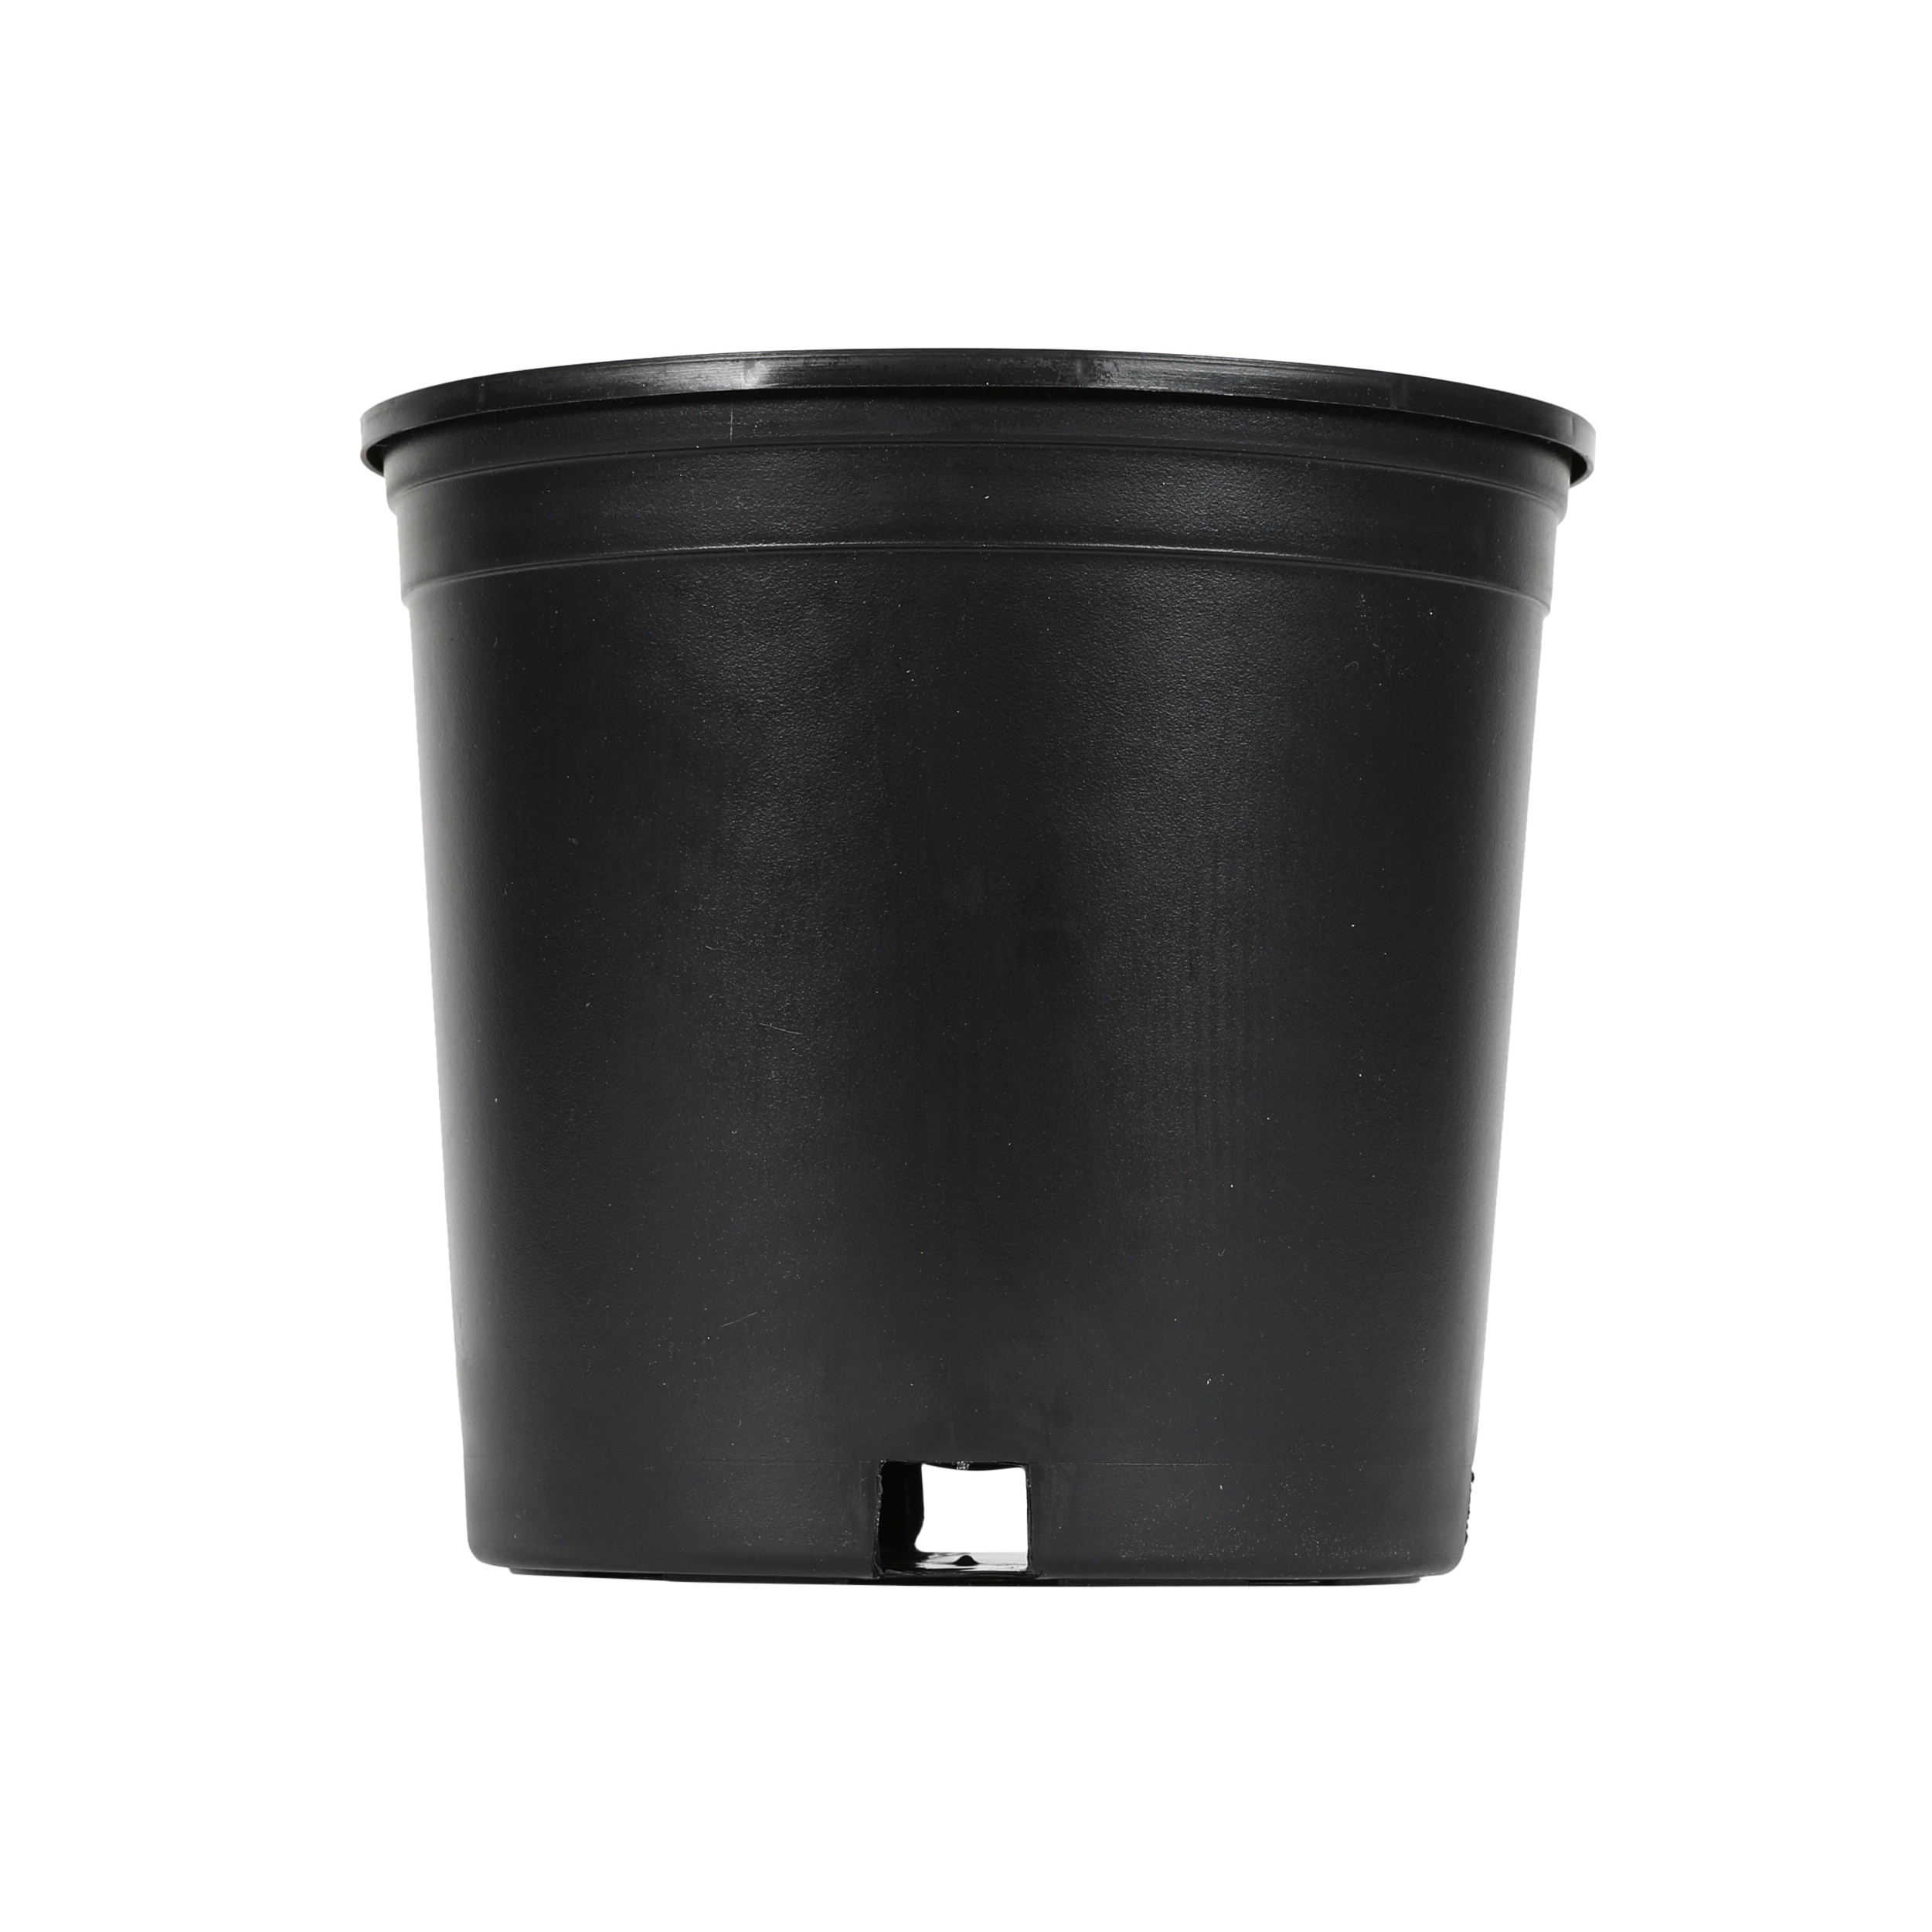 10/9/8/7/6 Inch Plant Pots, Large Plastic Planters for Indoor Plants with  Draina